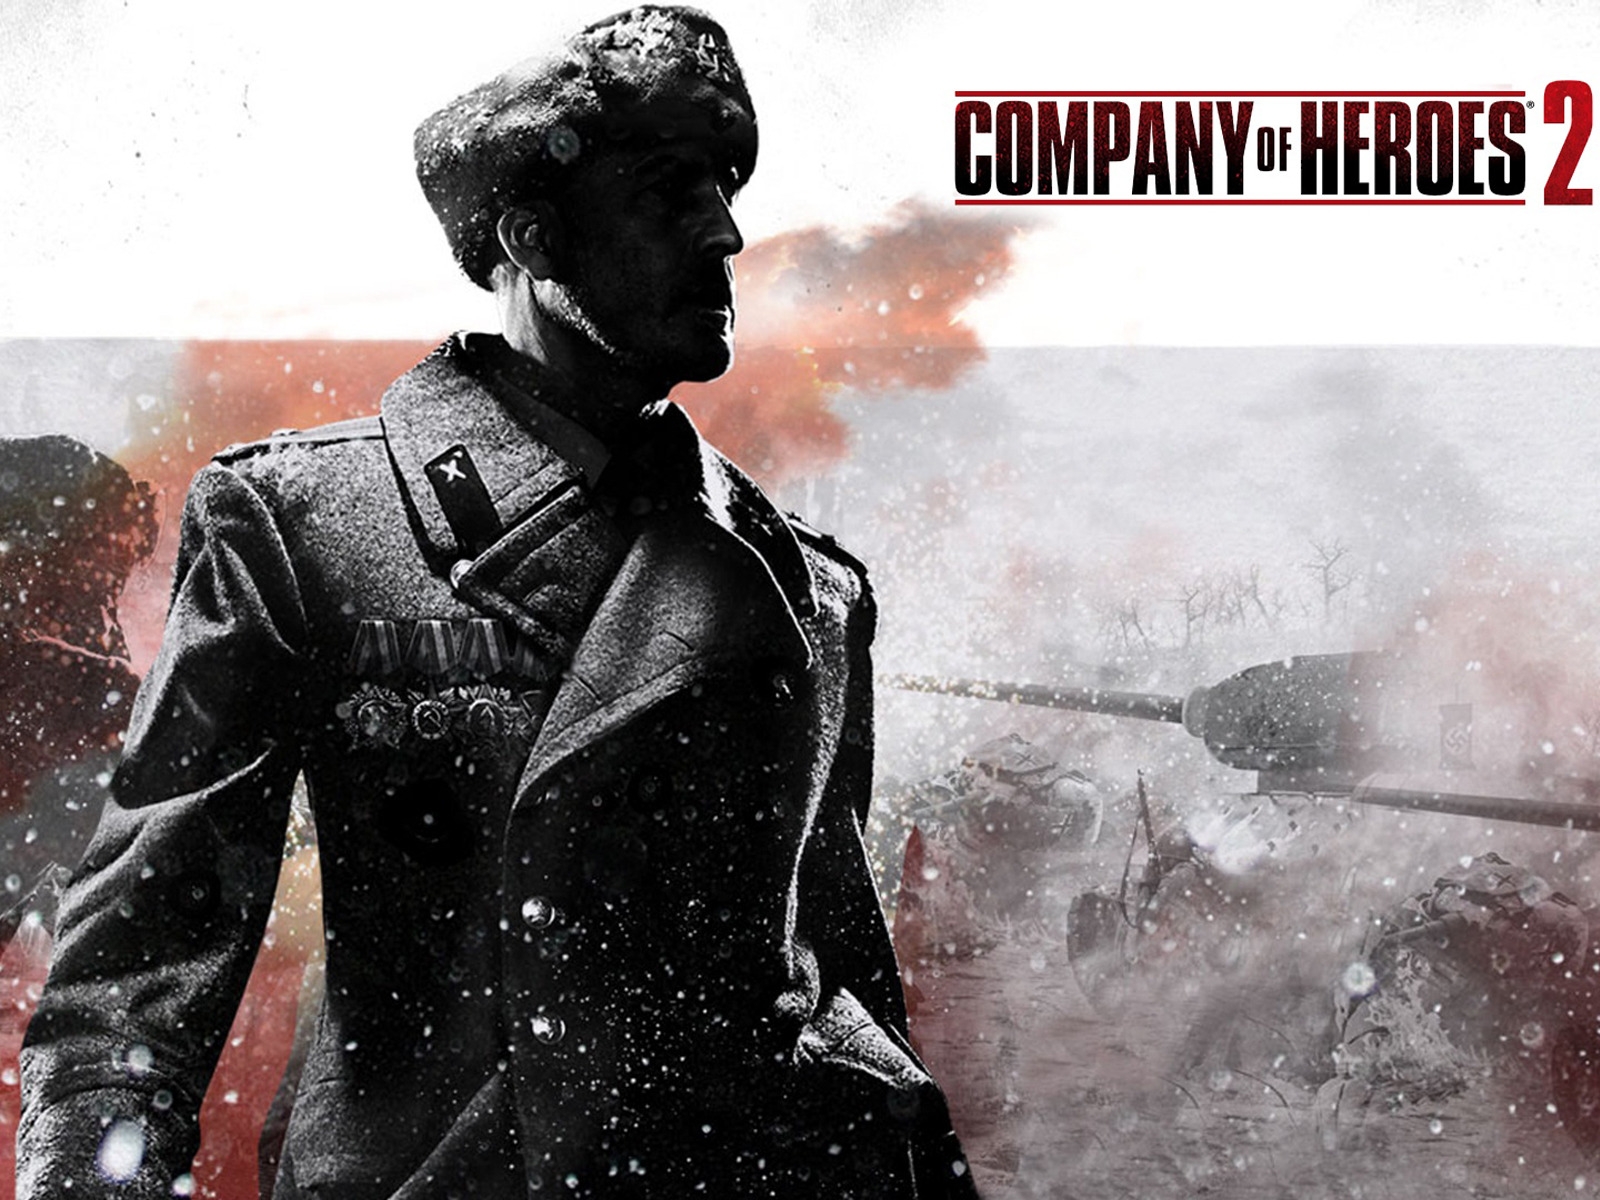 Company of Heroes 2 Character for 1600 x 1200 resolution